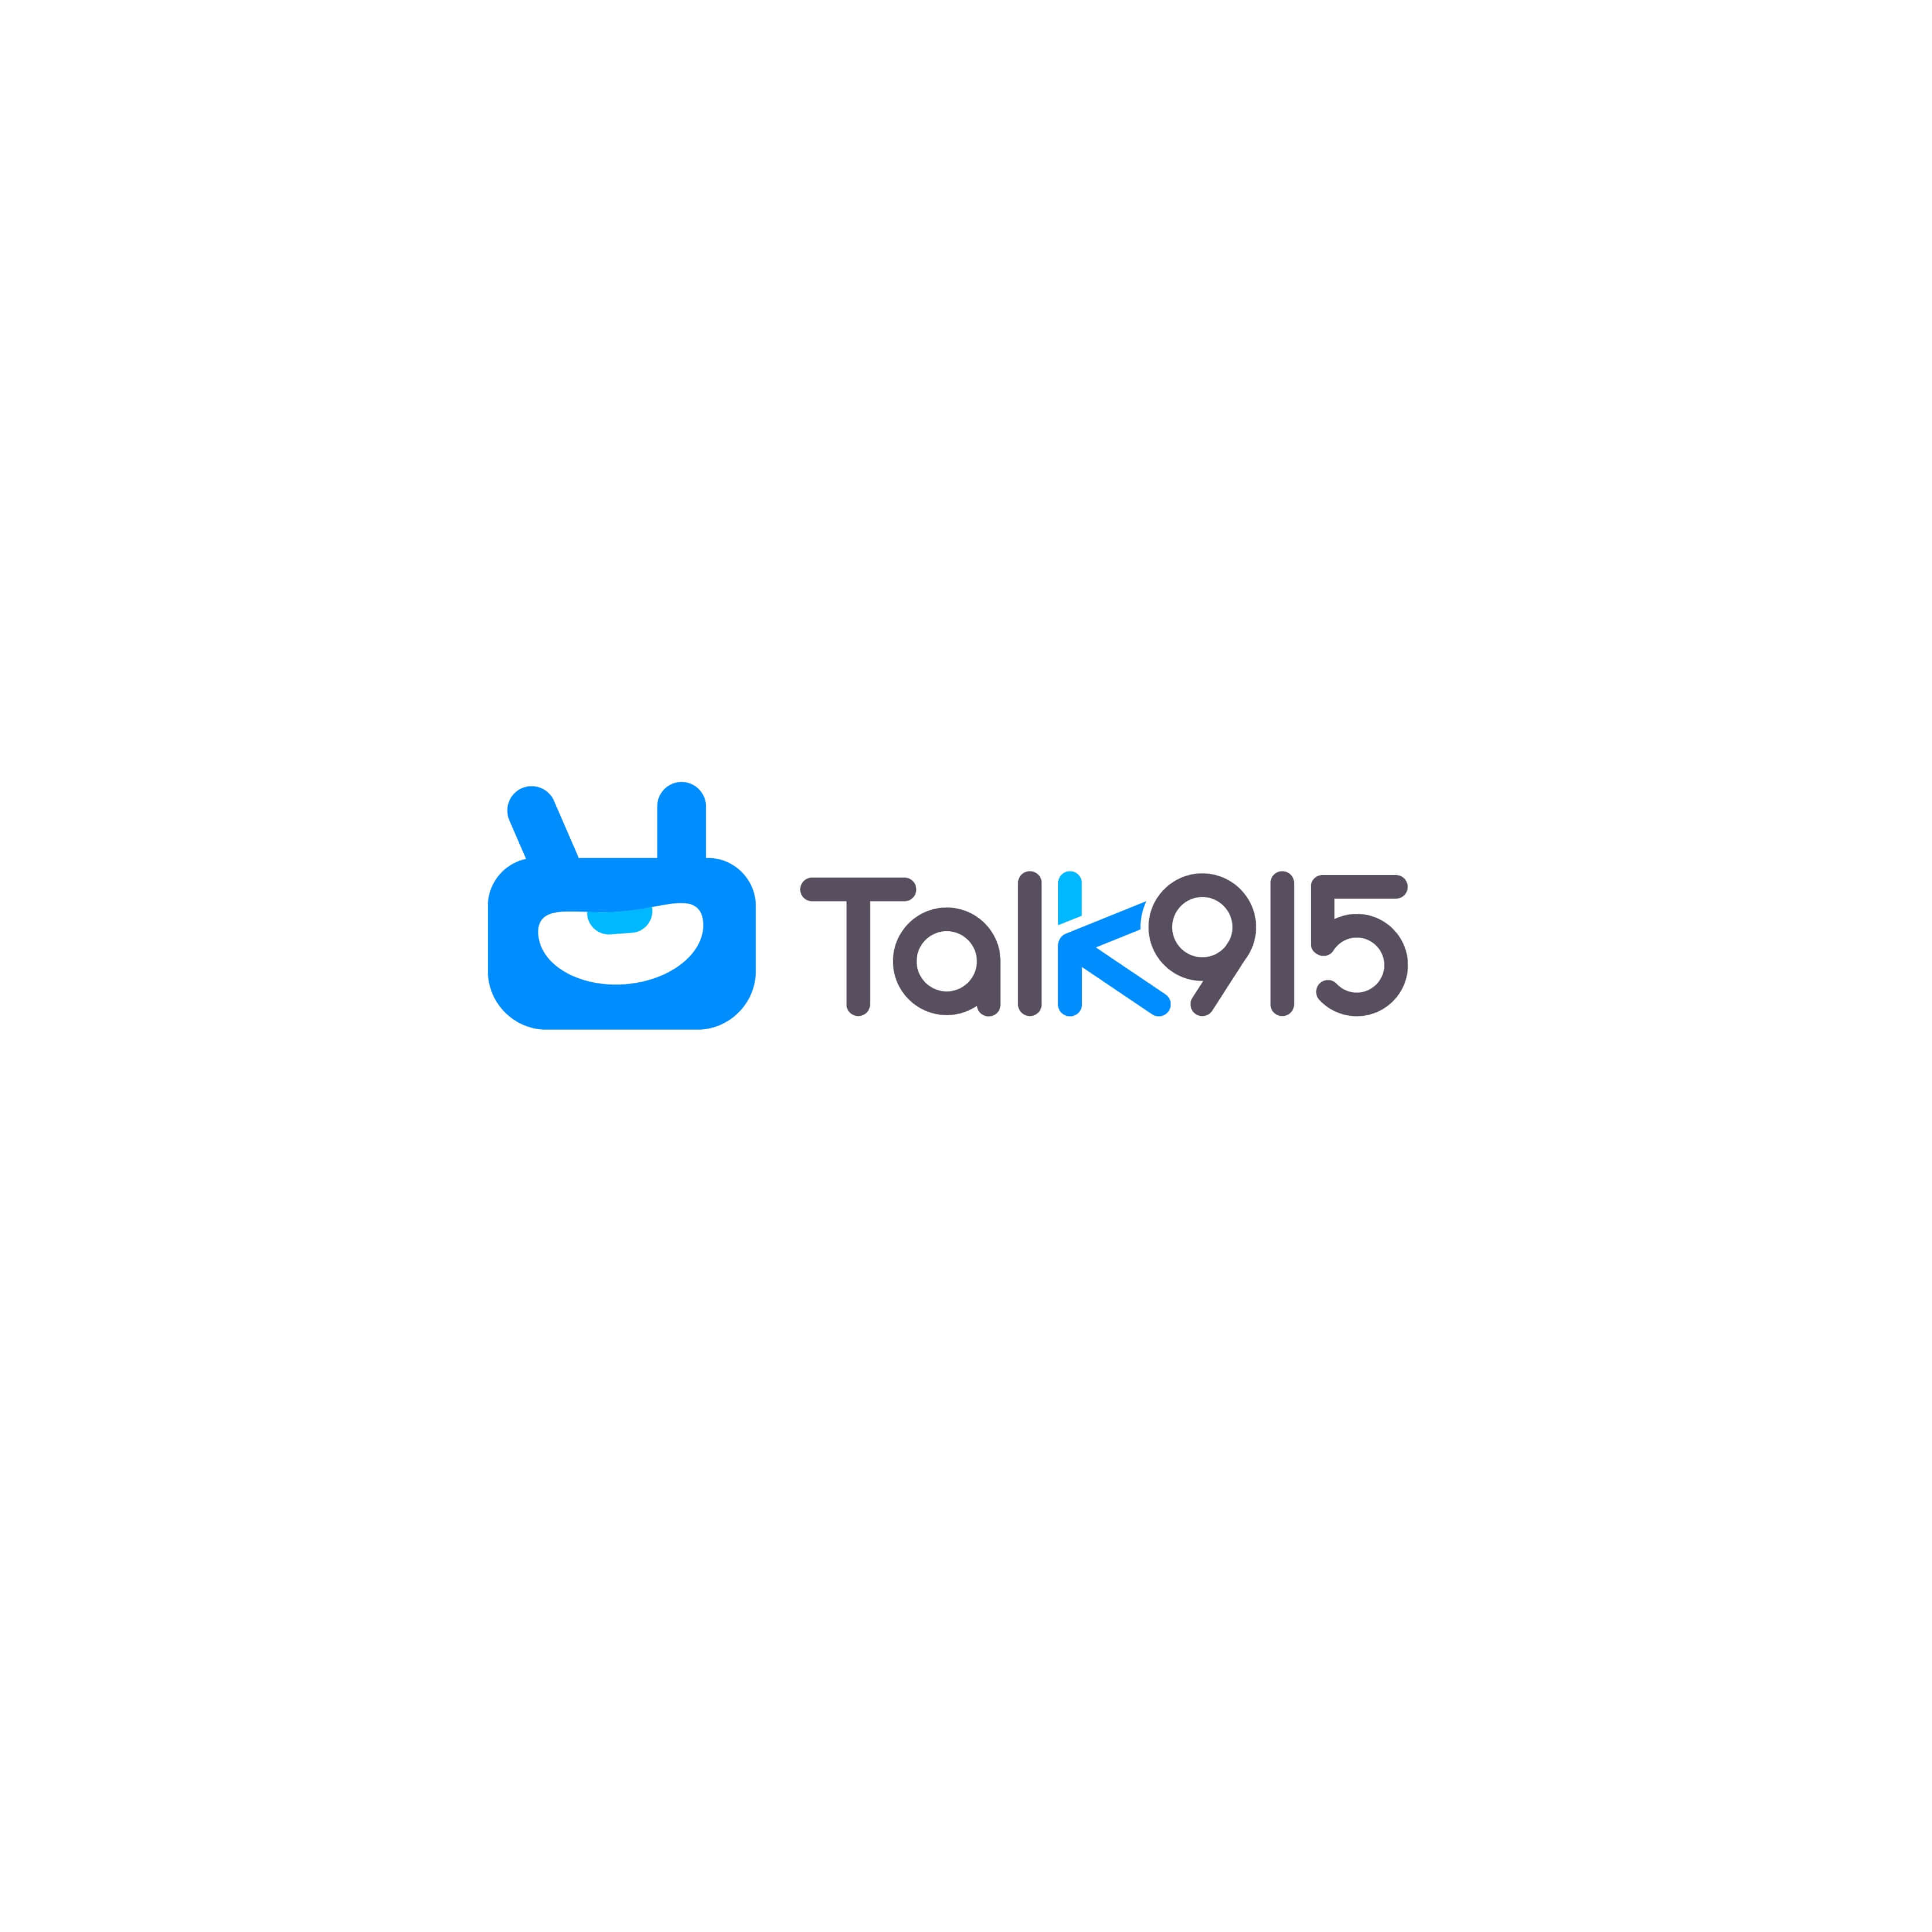 Online English Teaching Jobs(No nationality required)Talk915 Logo